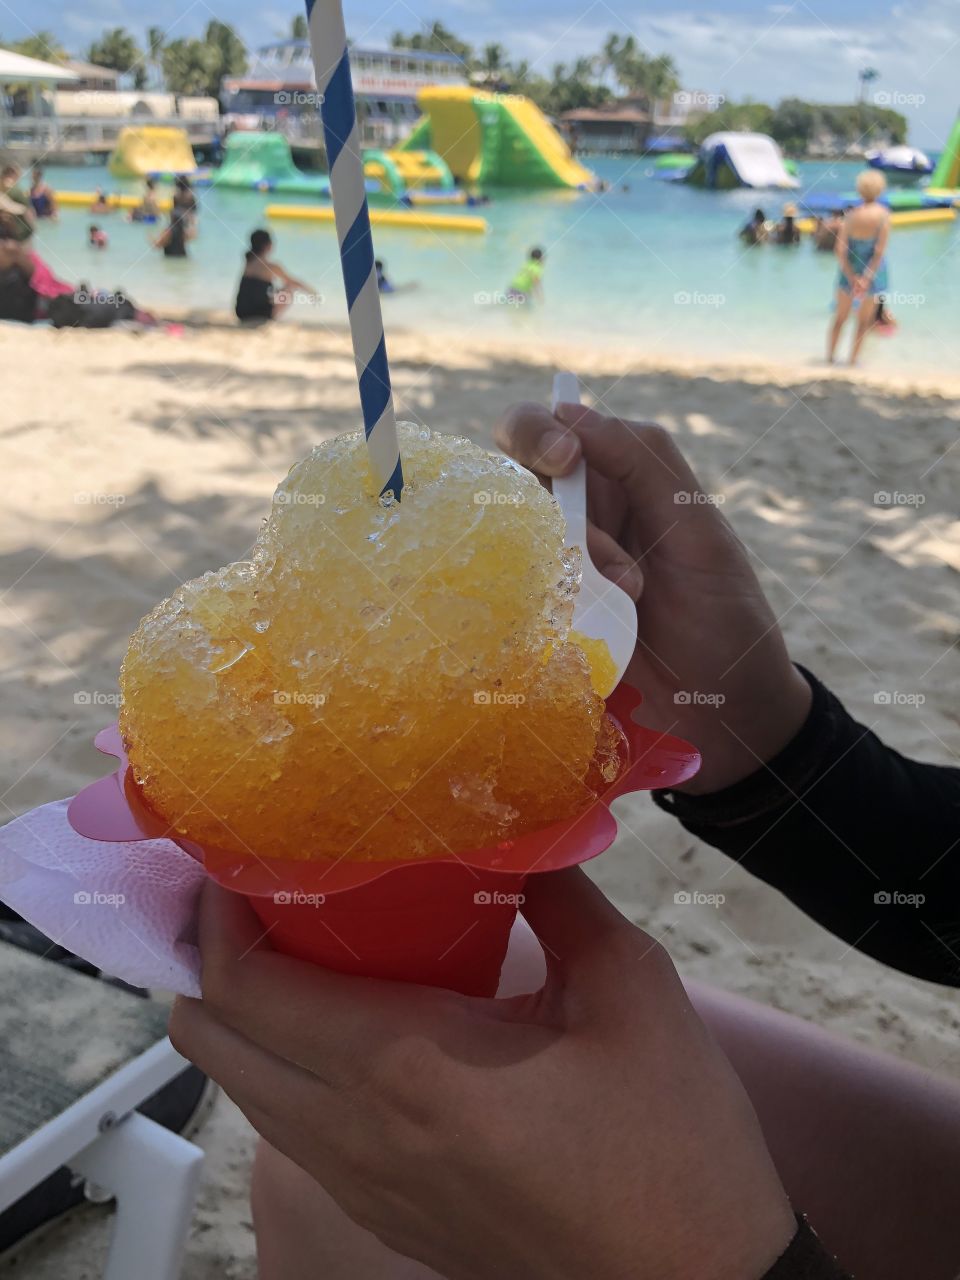 Shaved ice on a hot summer day.